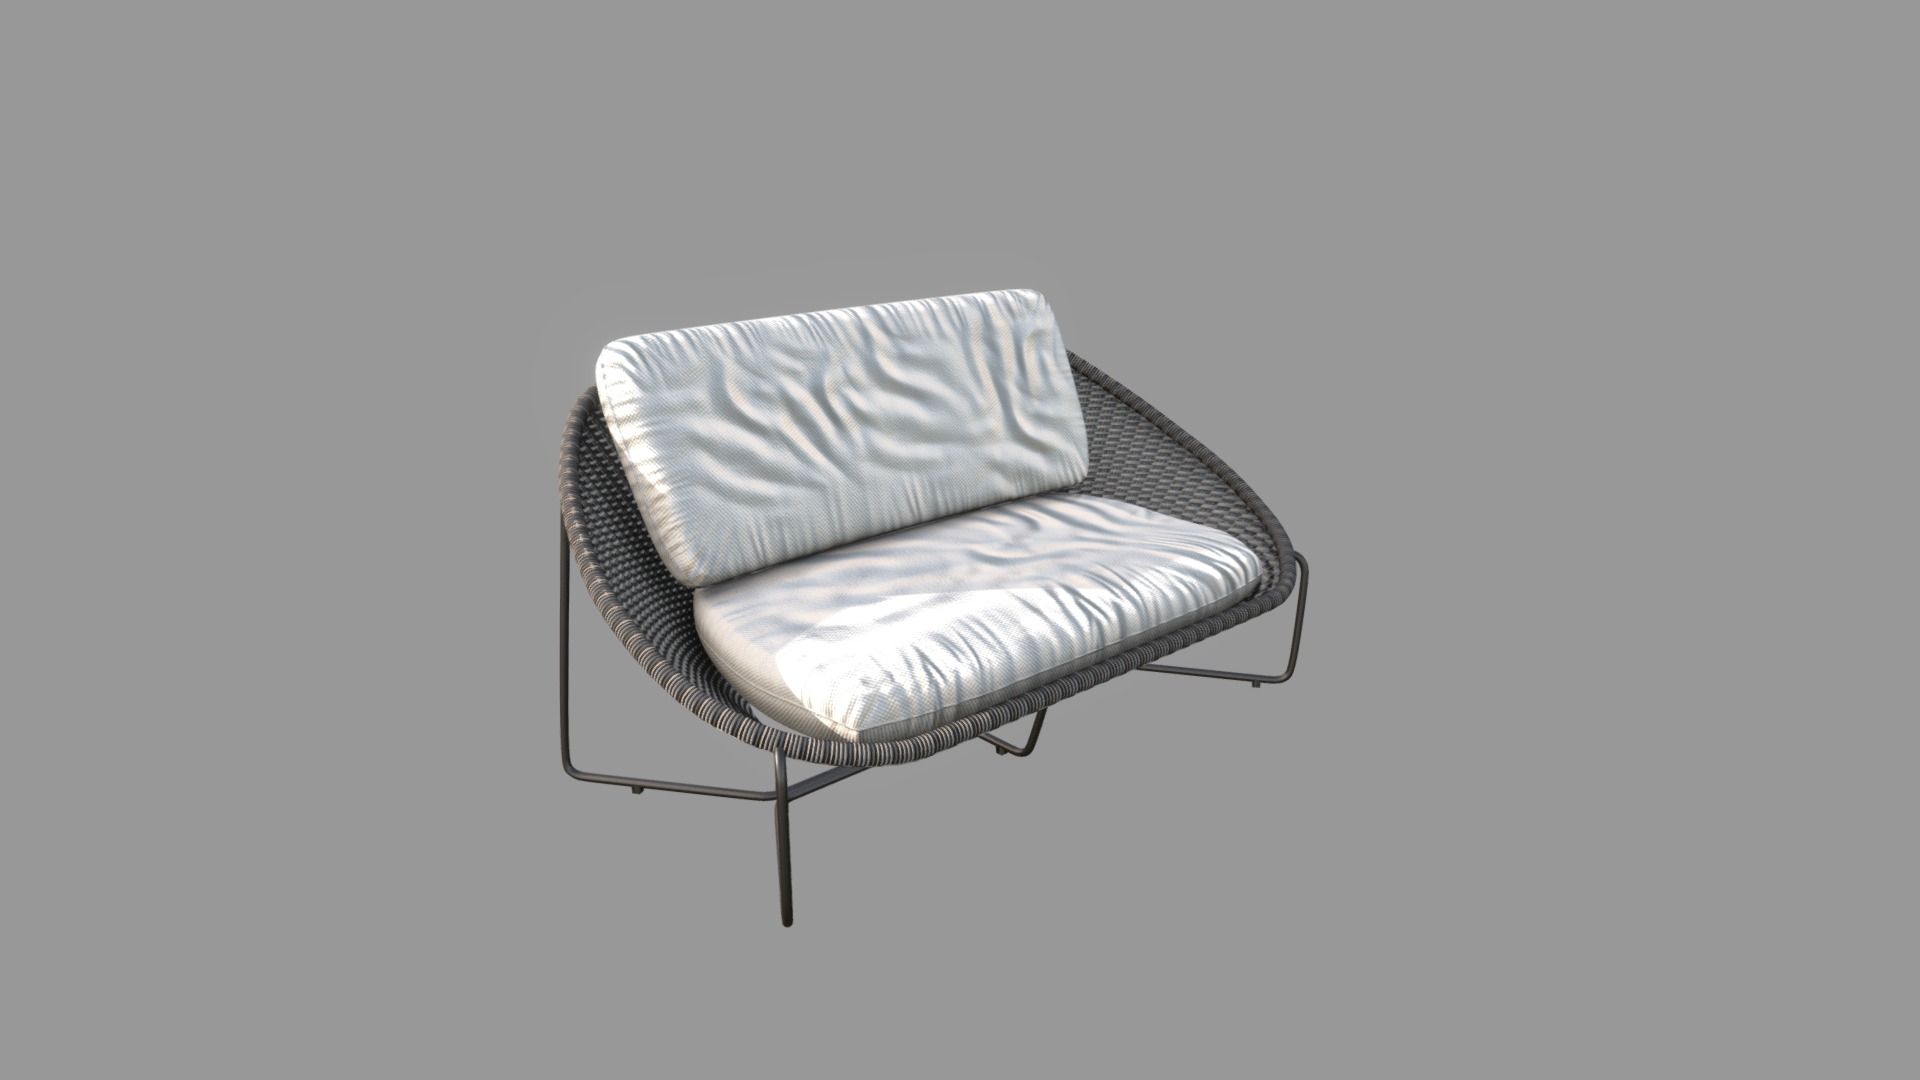 3D model SofaOutdoor MoroccoLoveseat - This is a 3D model of the SofaOutdoor MoroccoLoveseat. The 3D model is about a chair with a cushion.